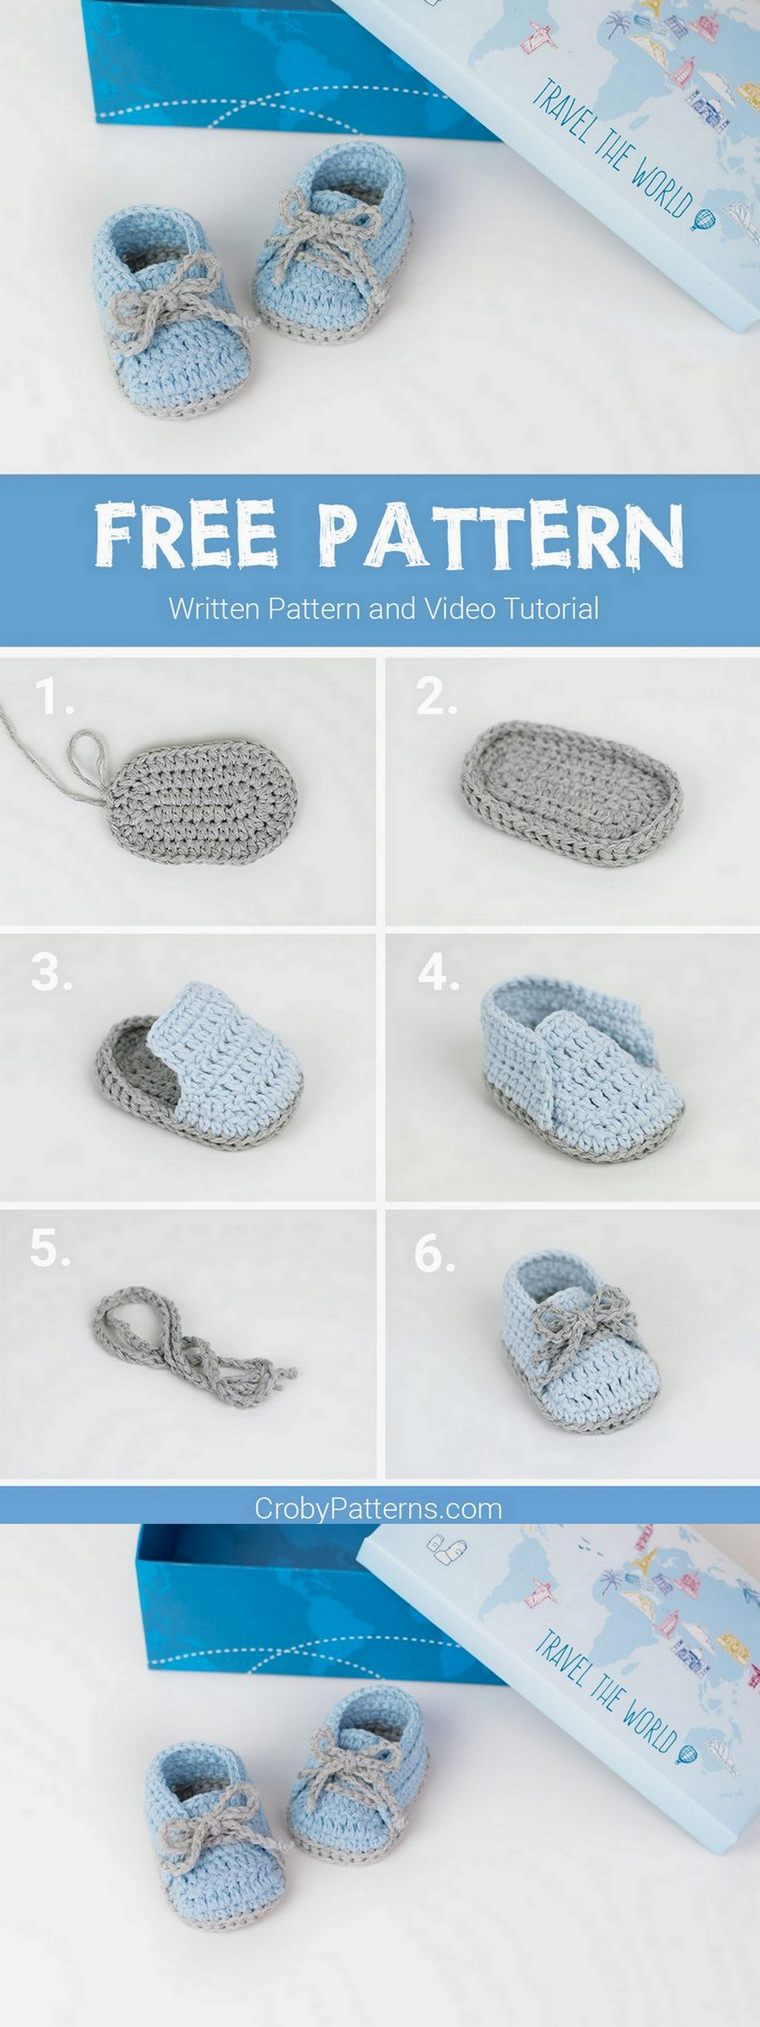 crochet baby booties with pearls pattern